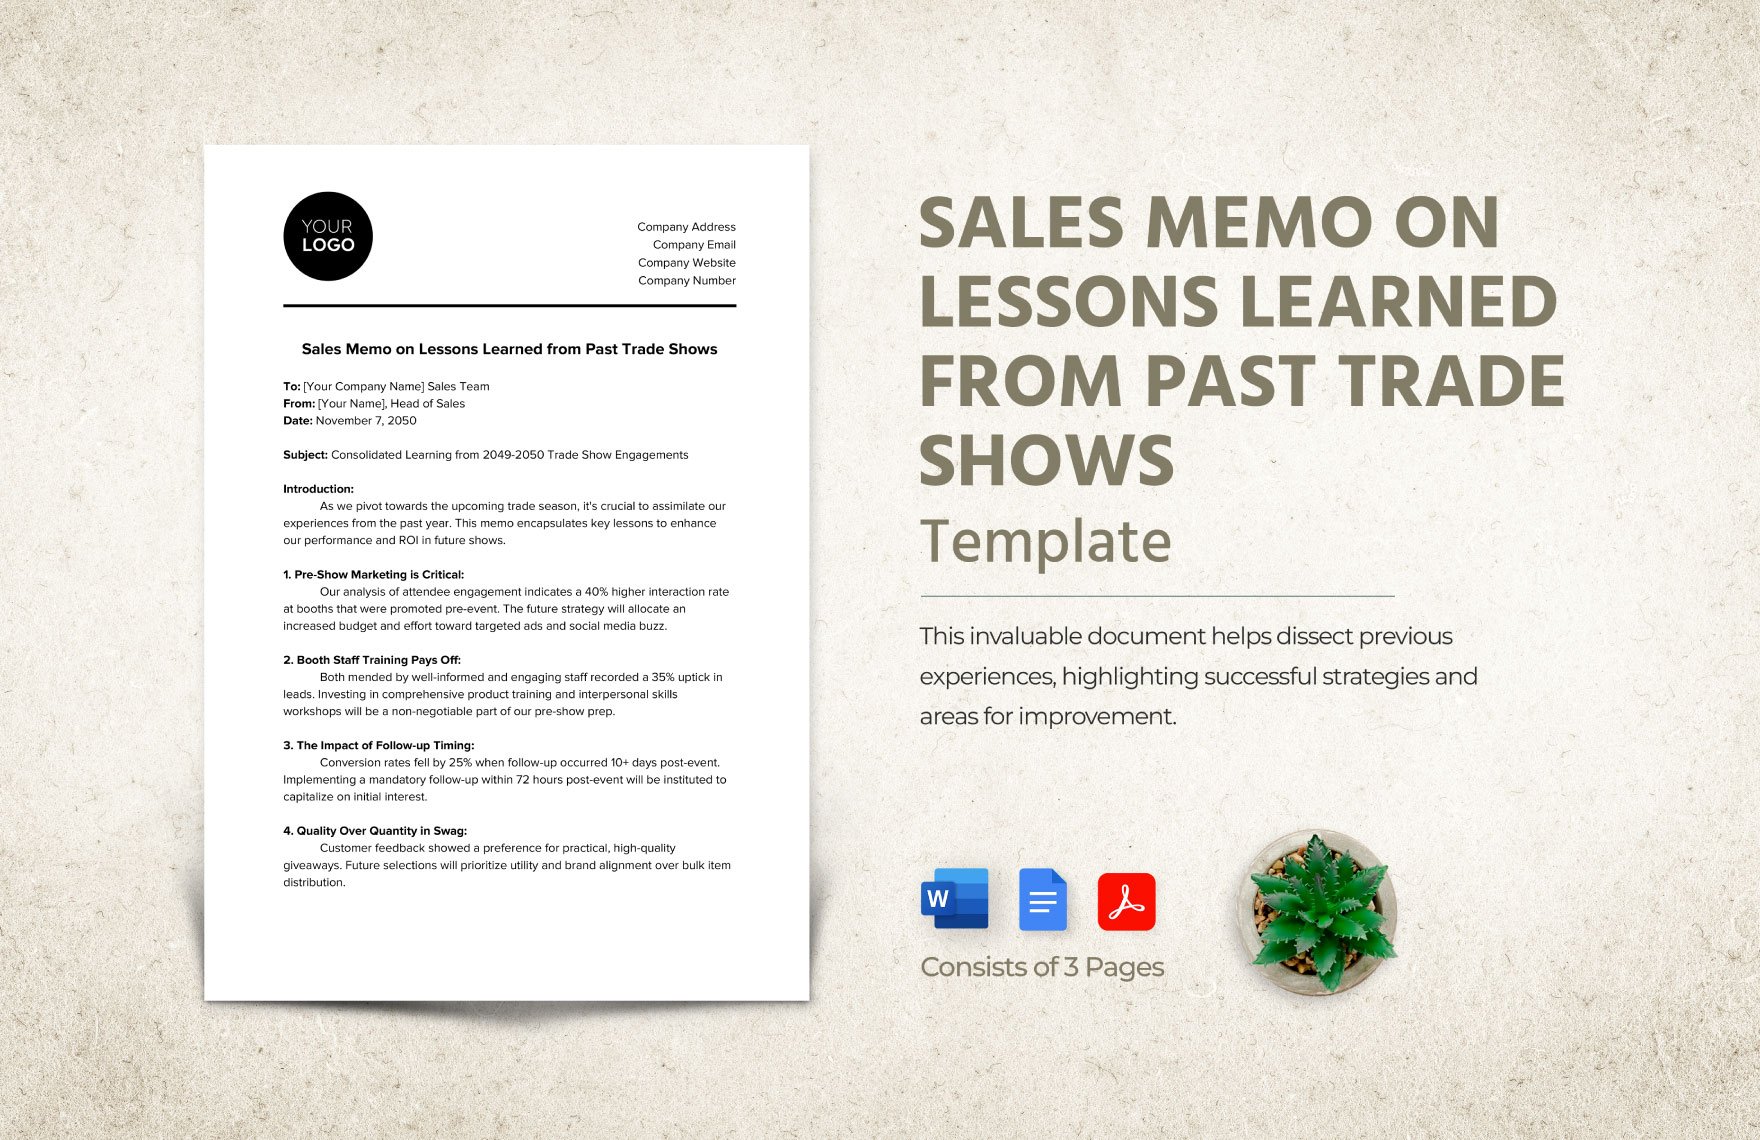 Sales Memo on Lessons Learned from Past Trade Shows Template